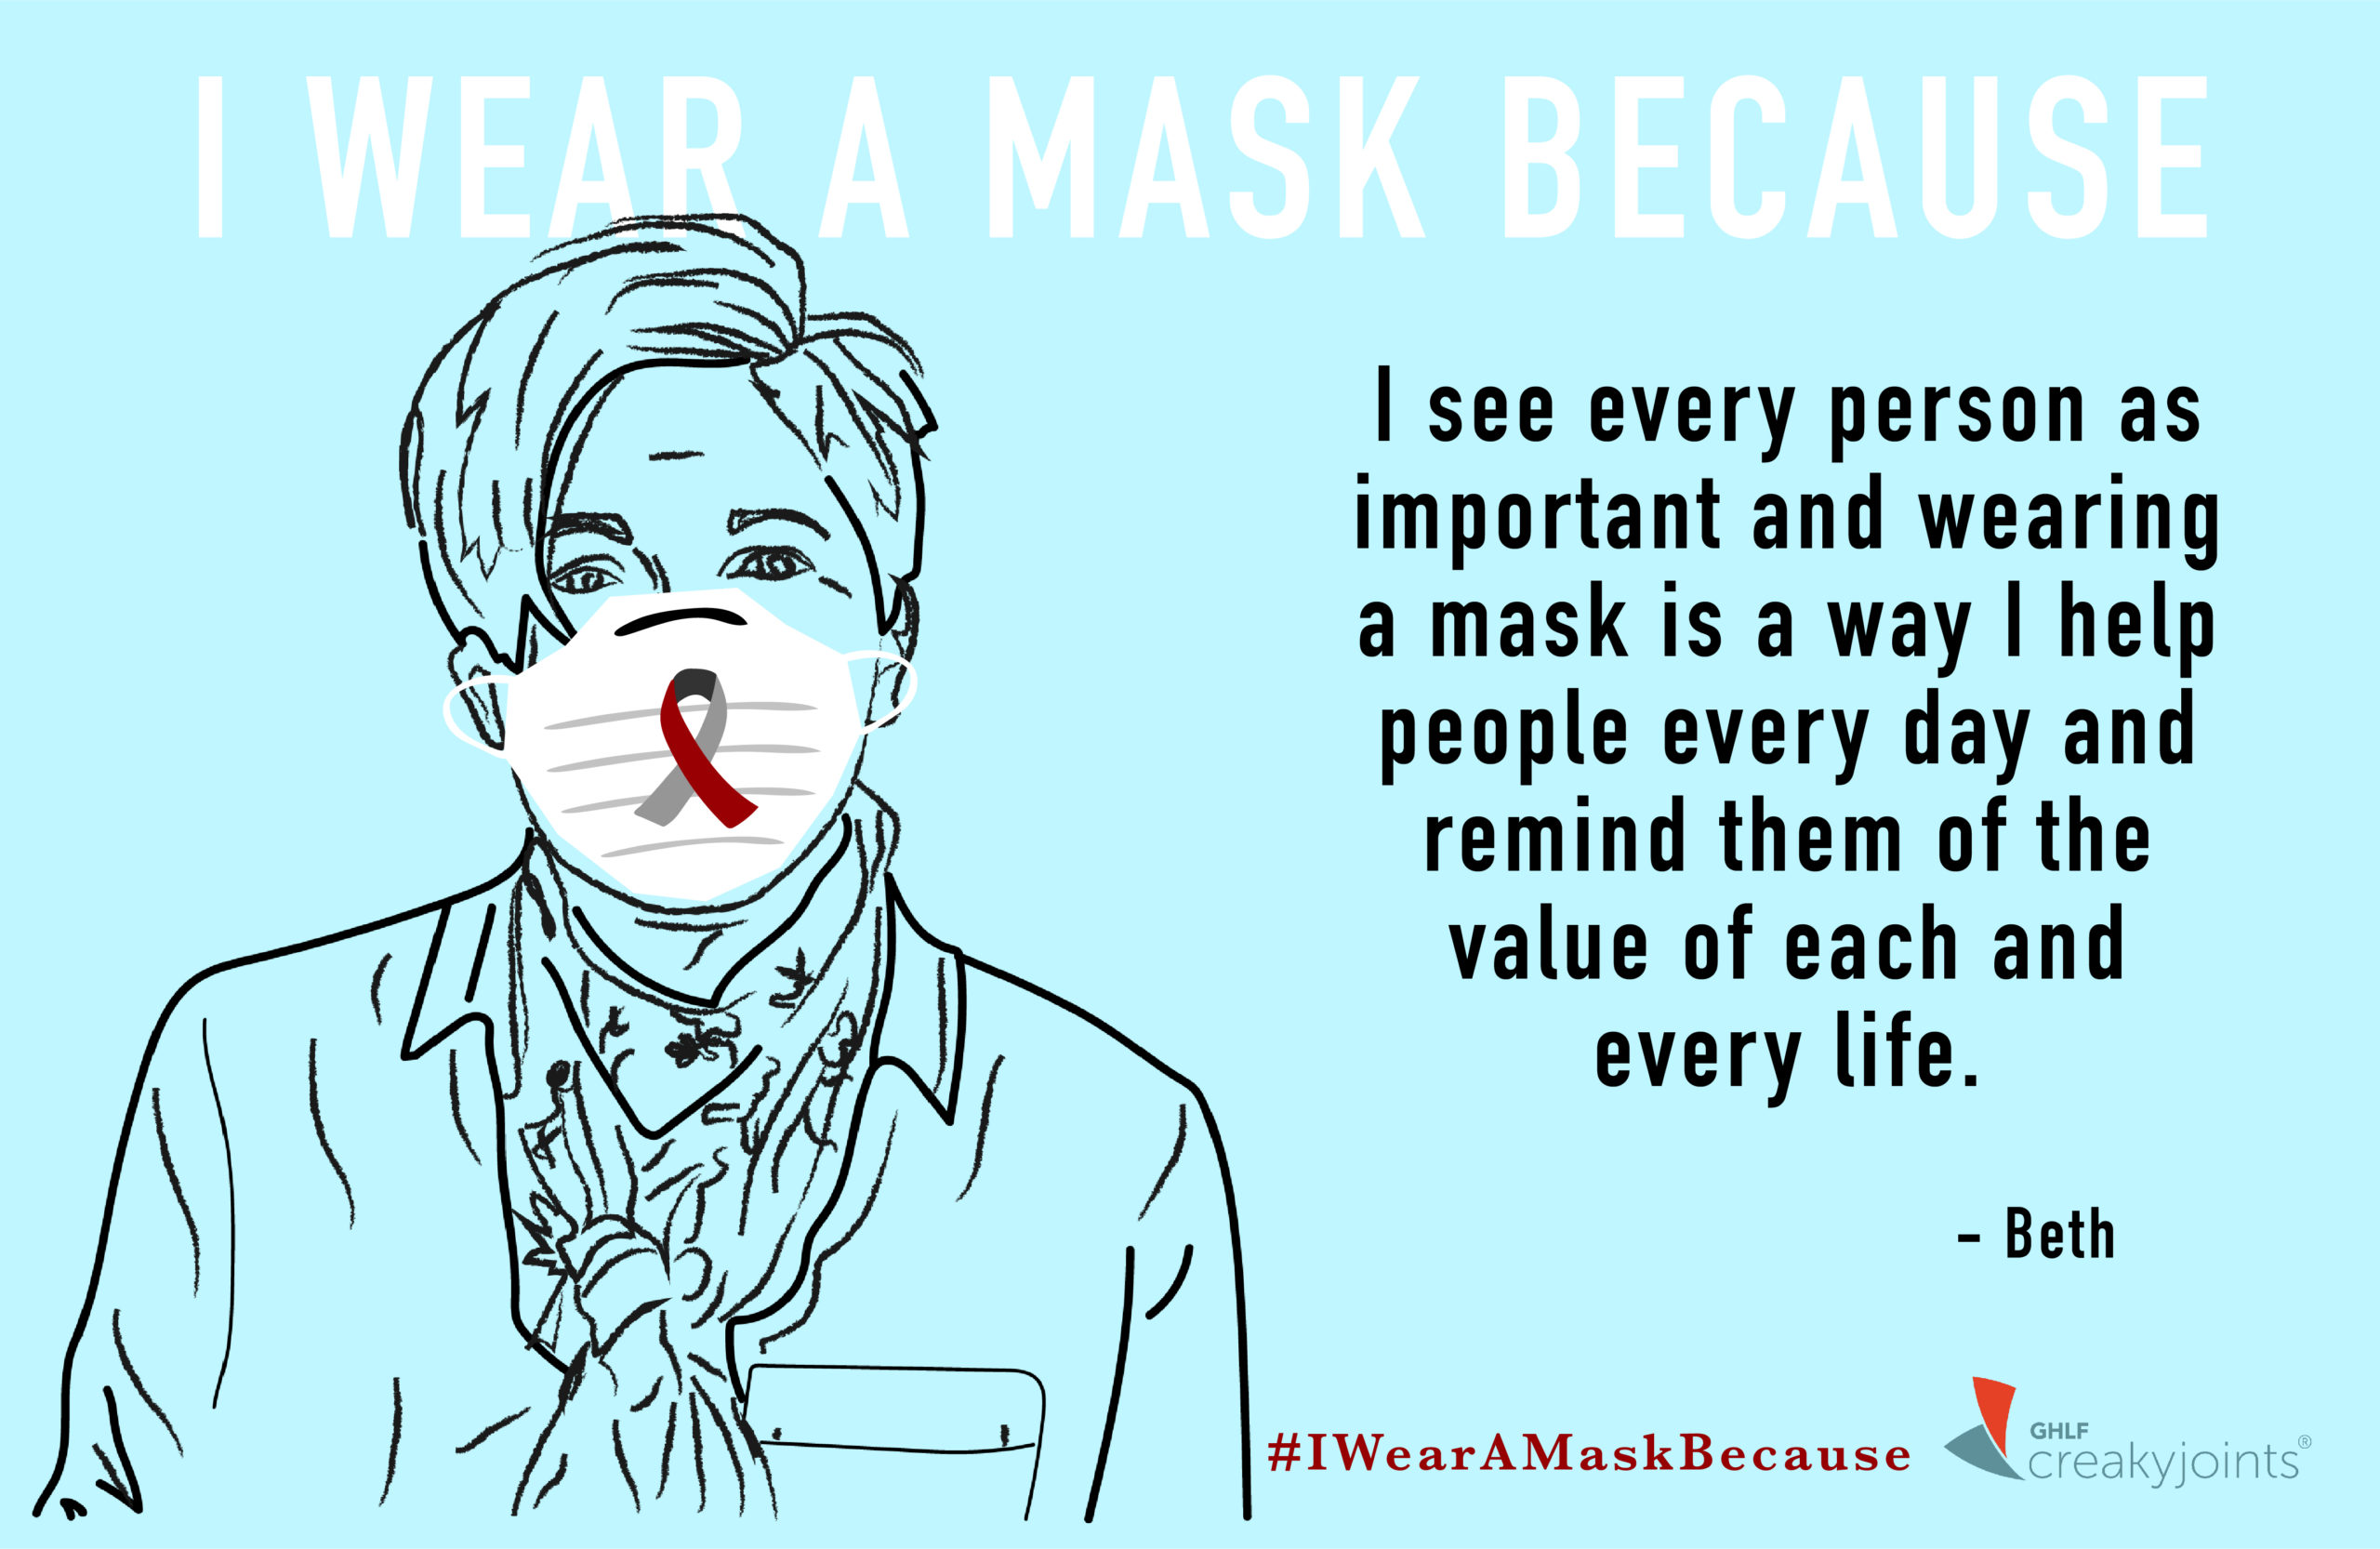 I Wear a Mask Because